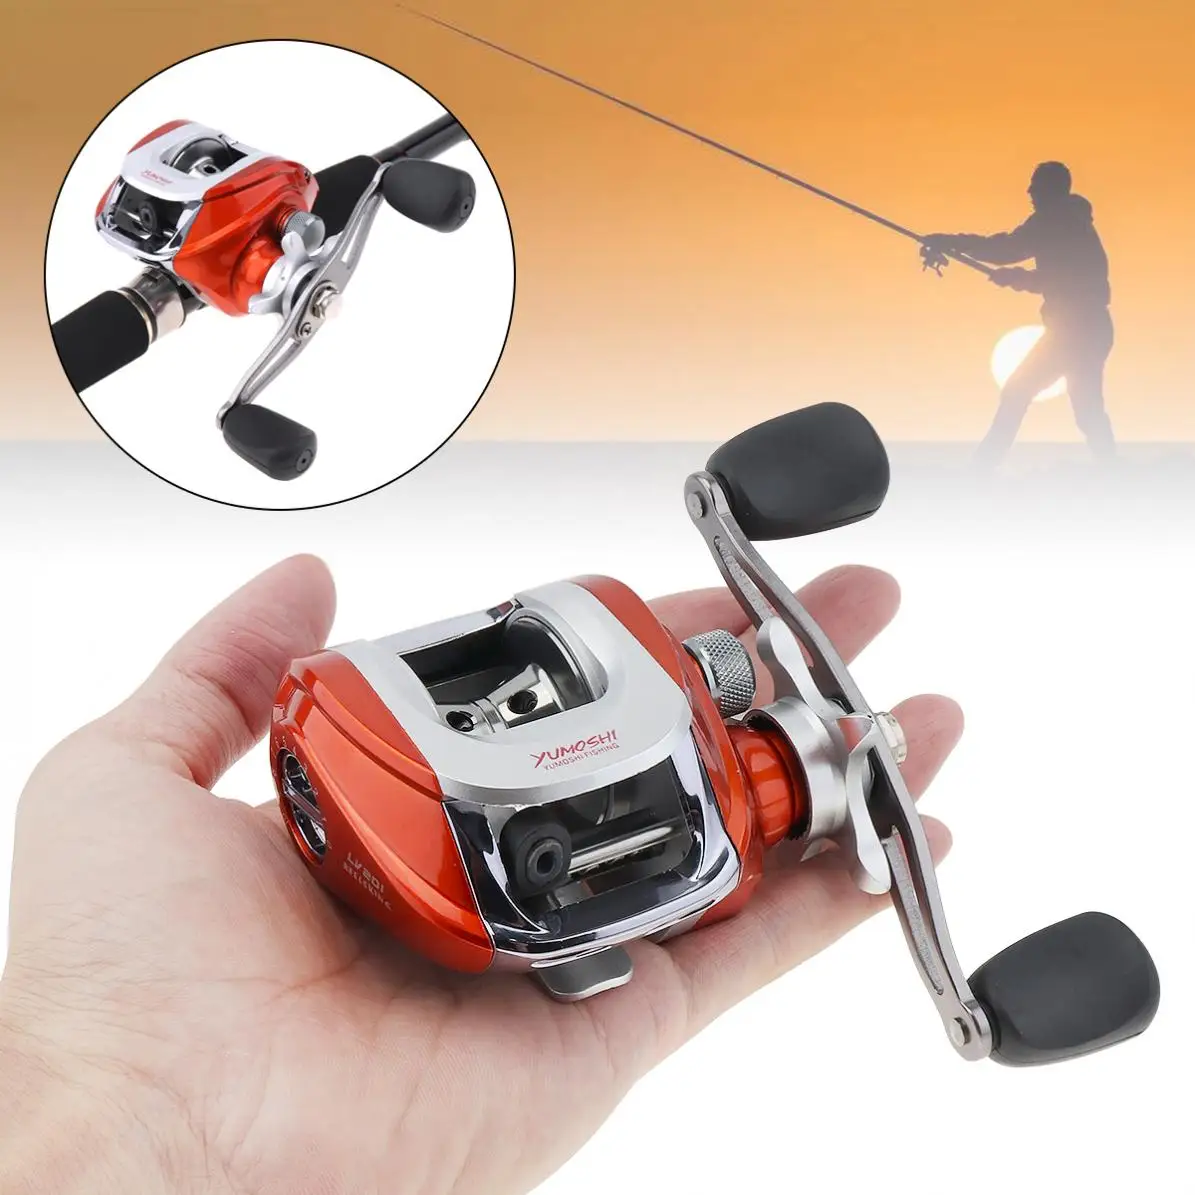 

12+1BB 6.3:1 Gear Ratio Stainless Steel Fishing Baitcasting Reel Max Drag 5KG/11LB with Magnetic Brake Right Left Hand Optional